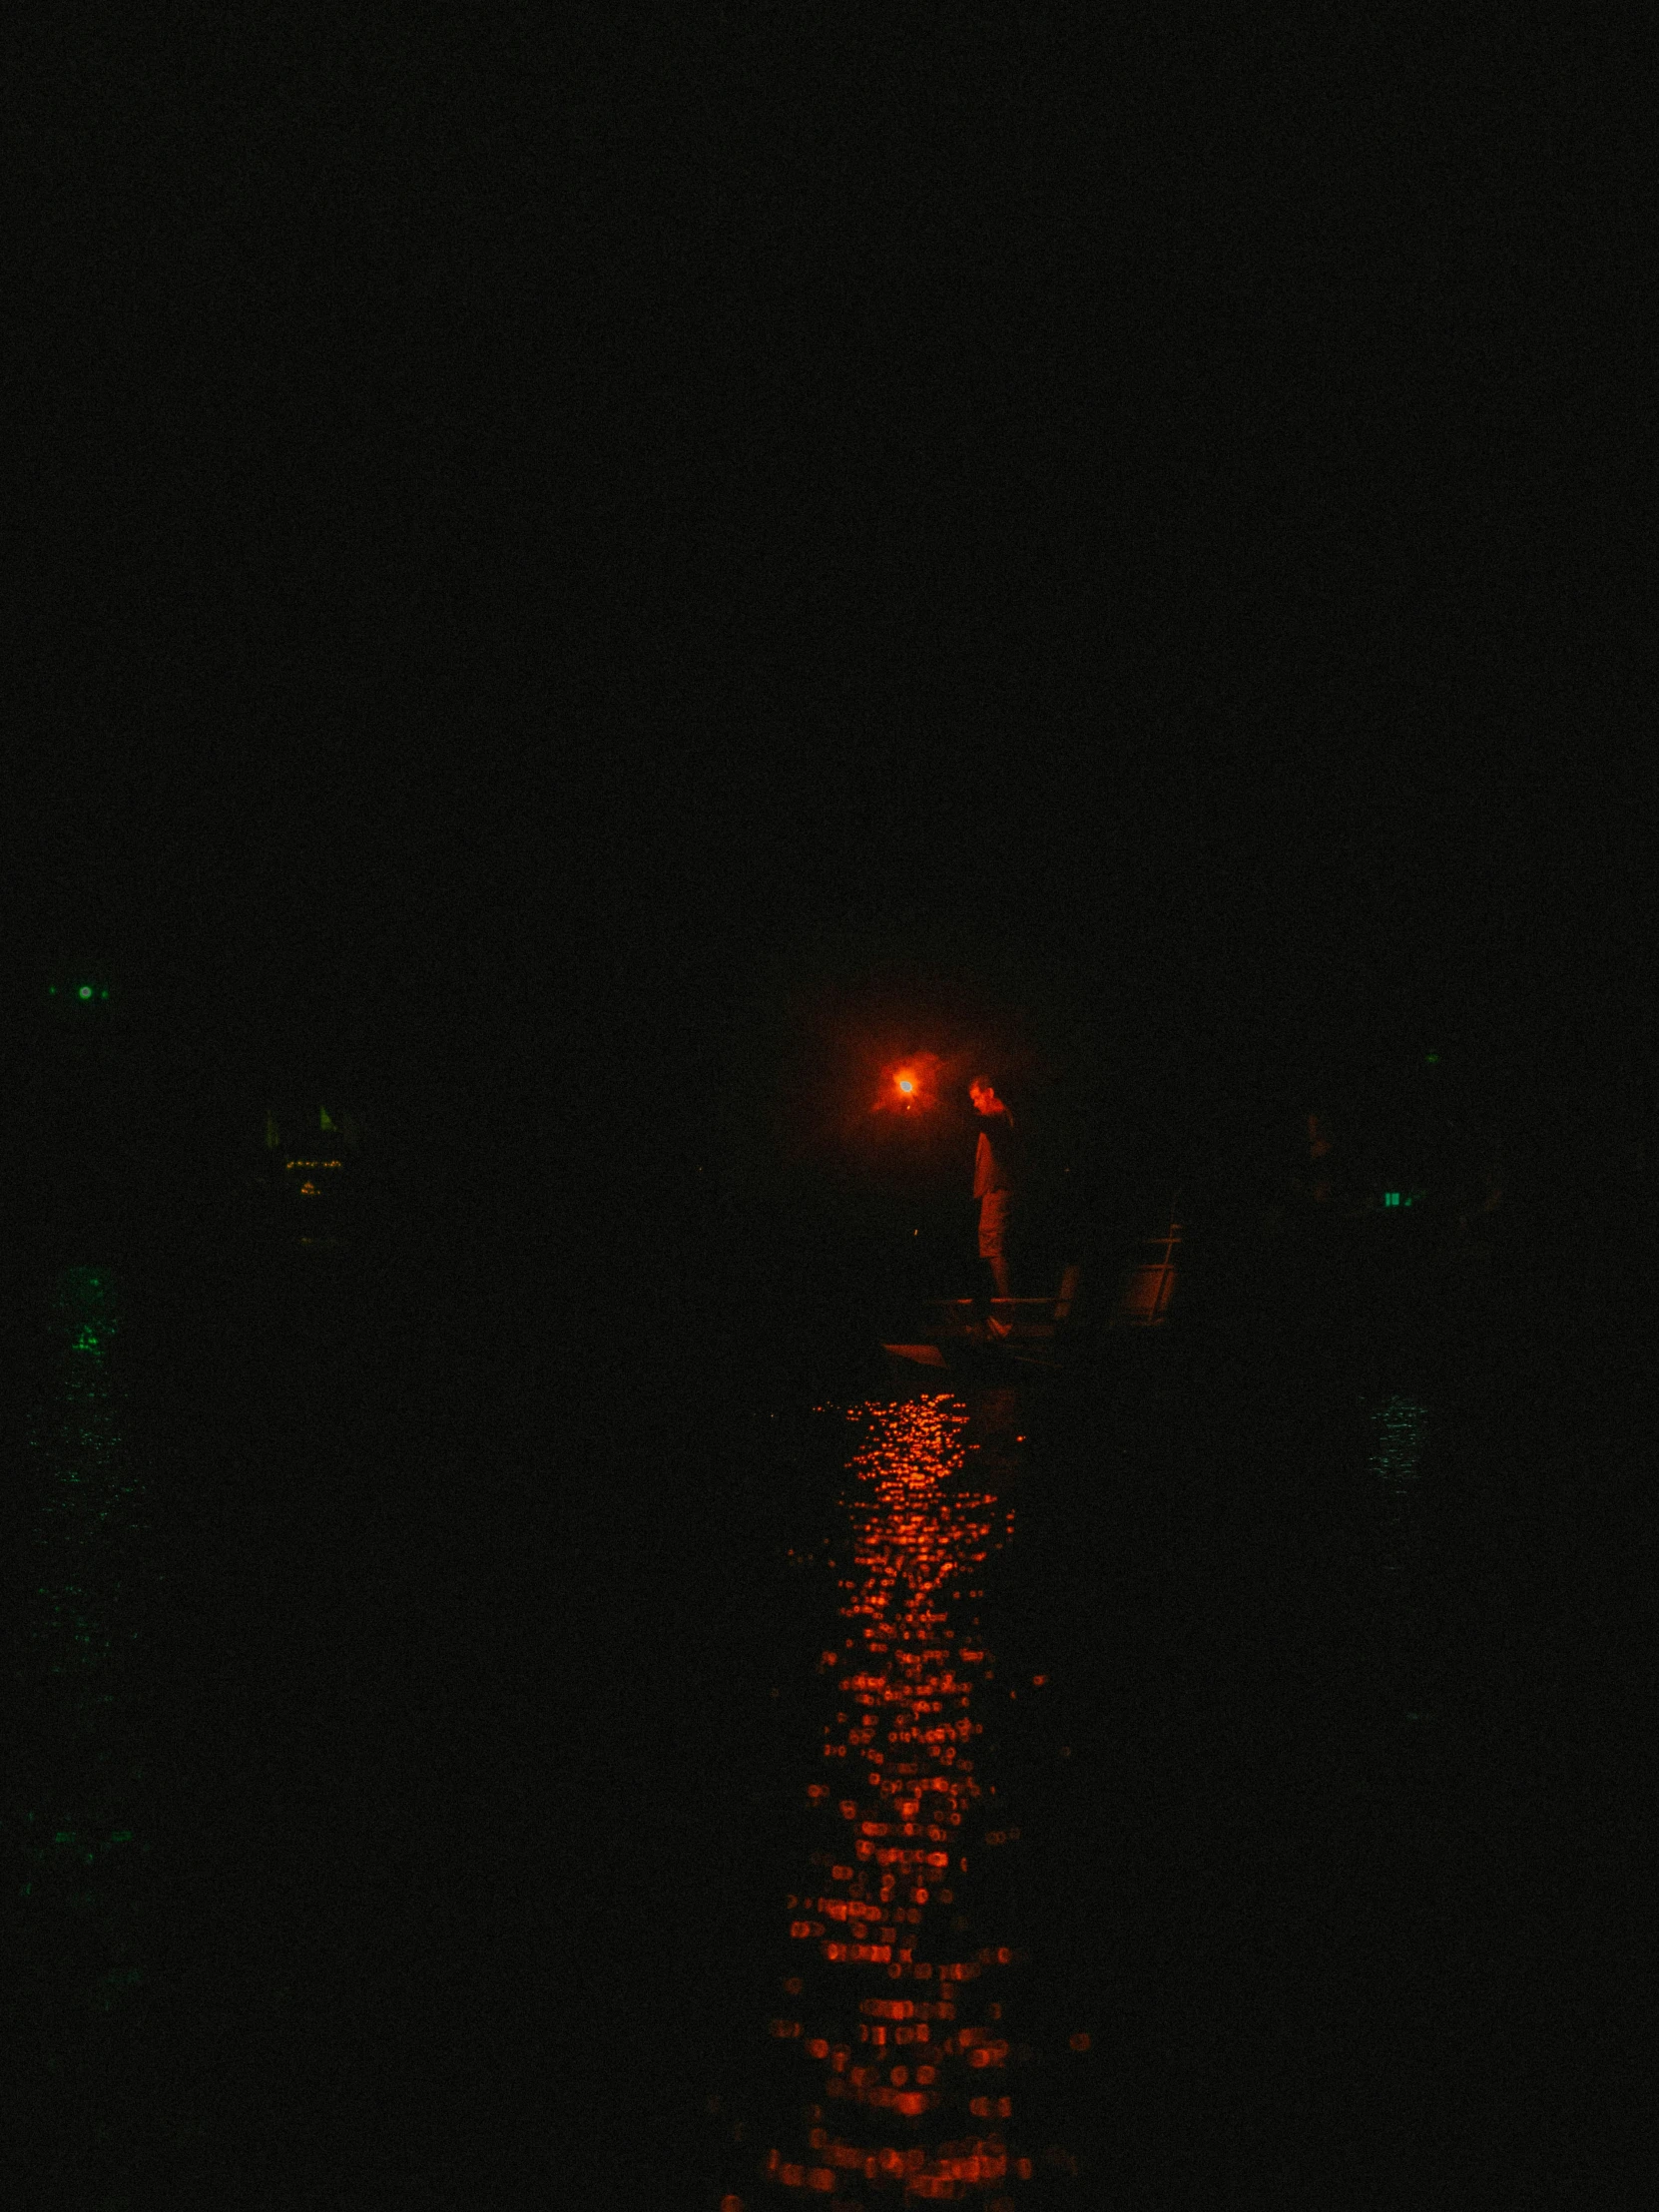 the street light glows brightly at night, along with its dark backdrop